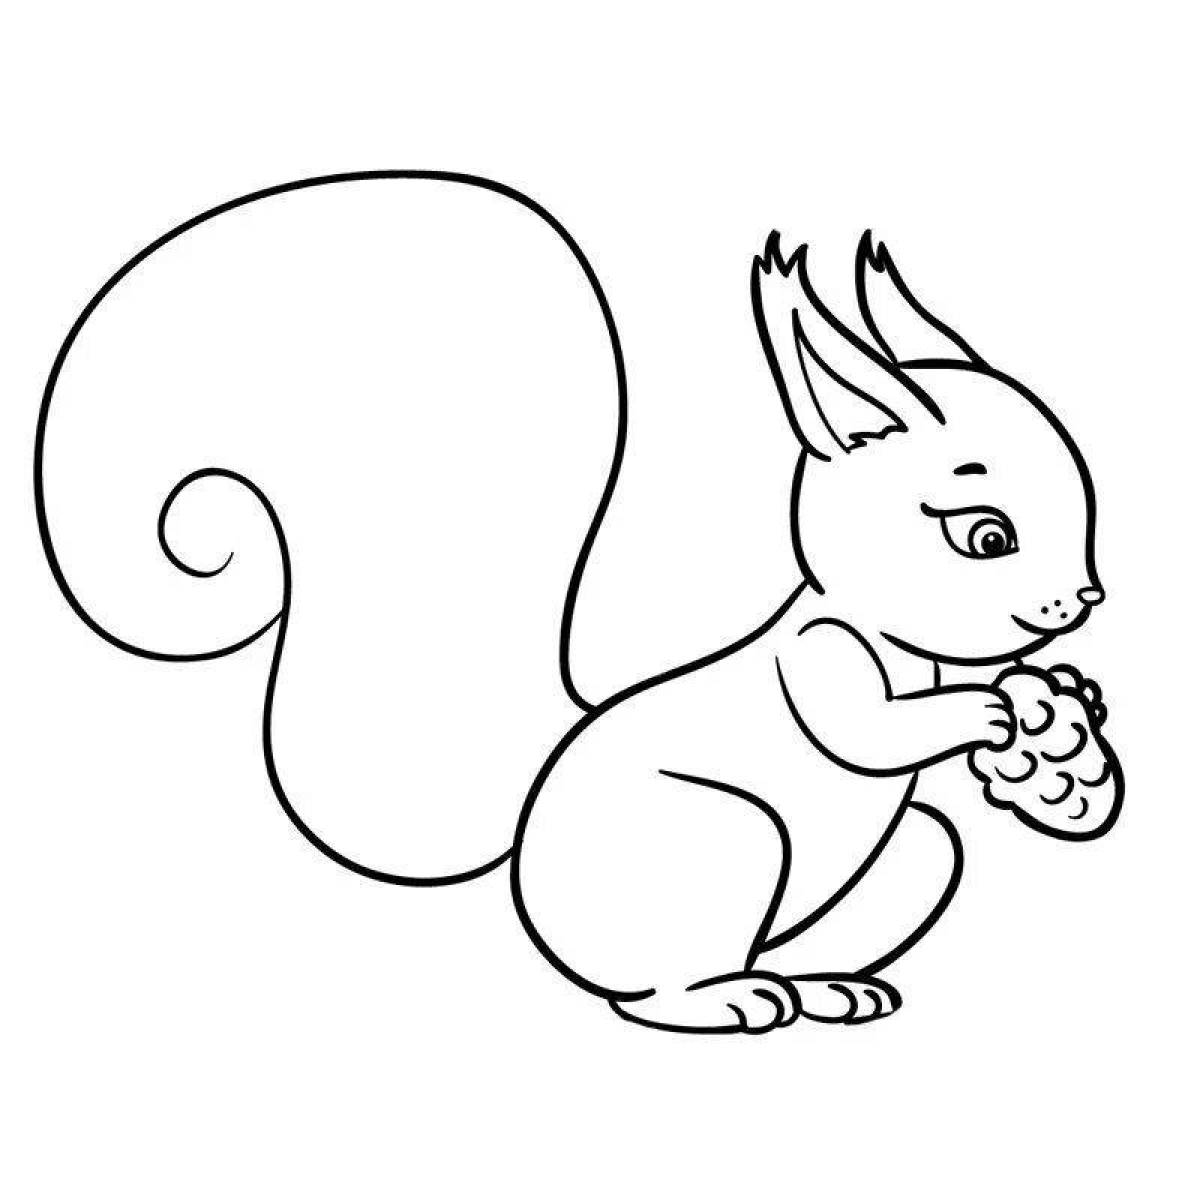 Coloring book excited squirrel